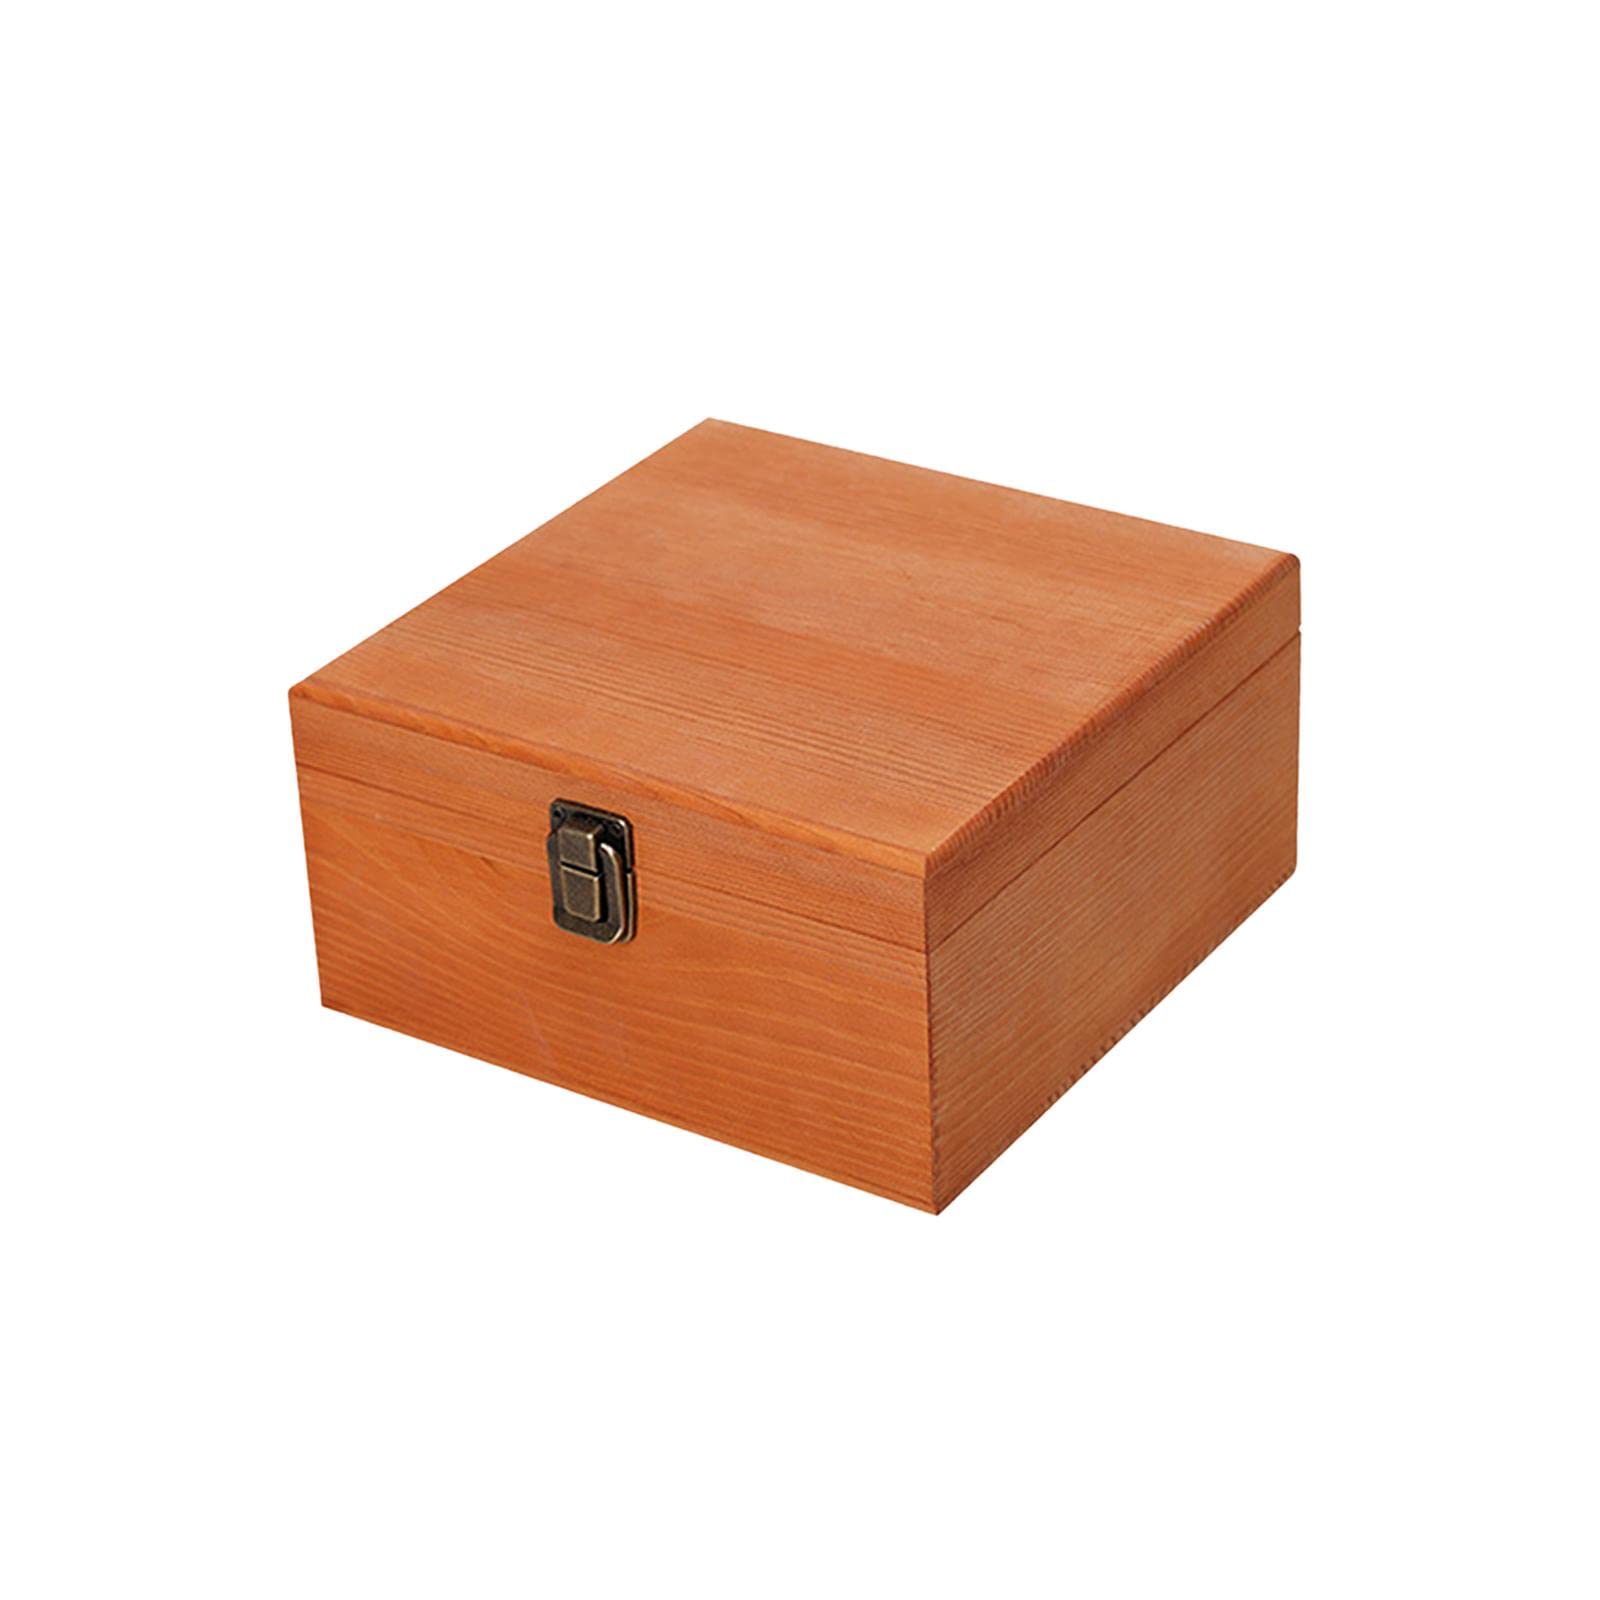 Mua a aternee Wooden Box Vintage Style Wooden Storage Box with ...